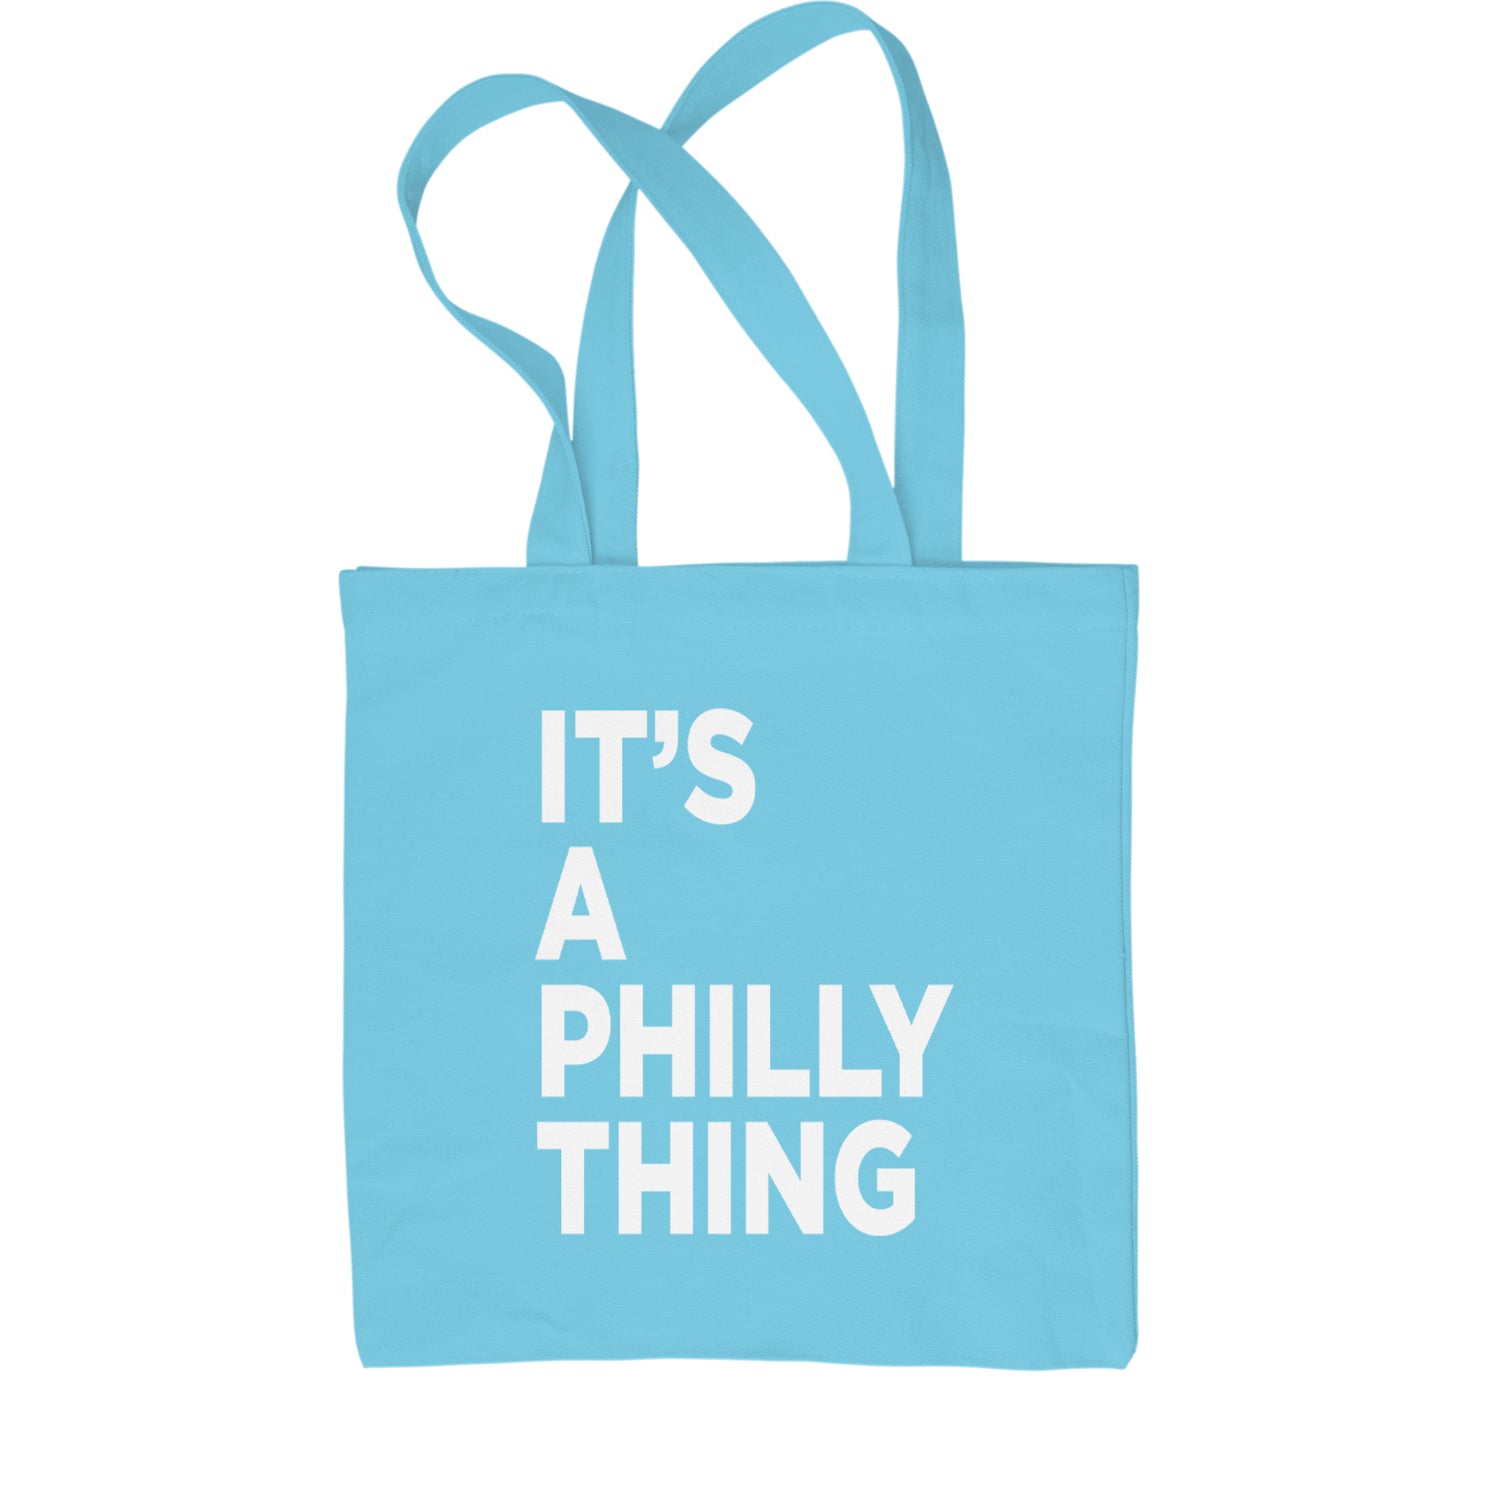 PHILLY It's A Philly Thing Shopping Tote Bag baseball, dilly, filly, football, jawn, morgan, Philadelphia, philli by Expression Tees